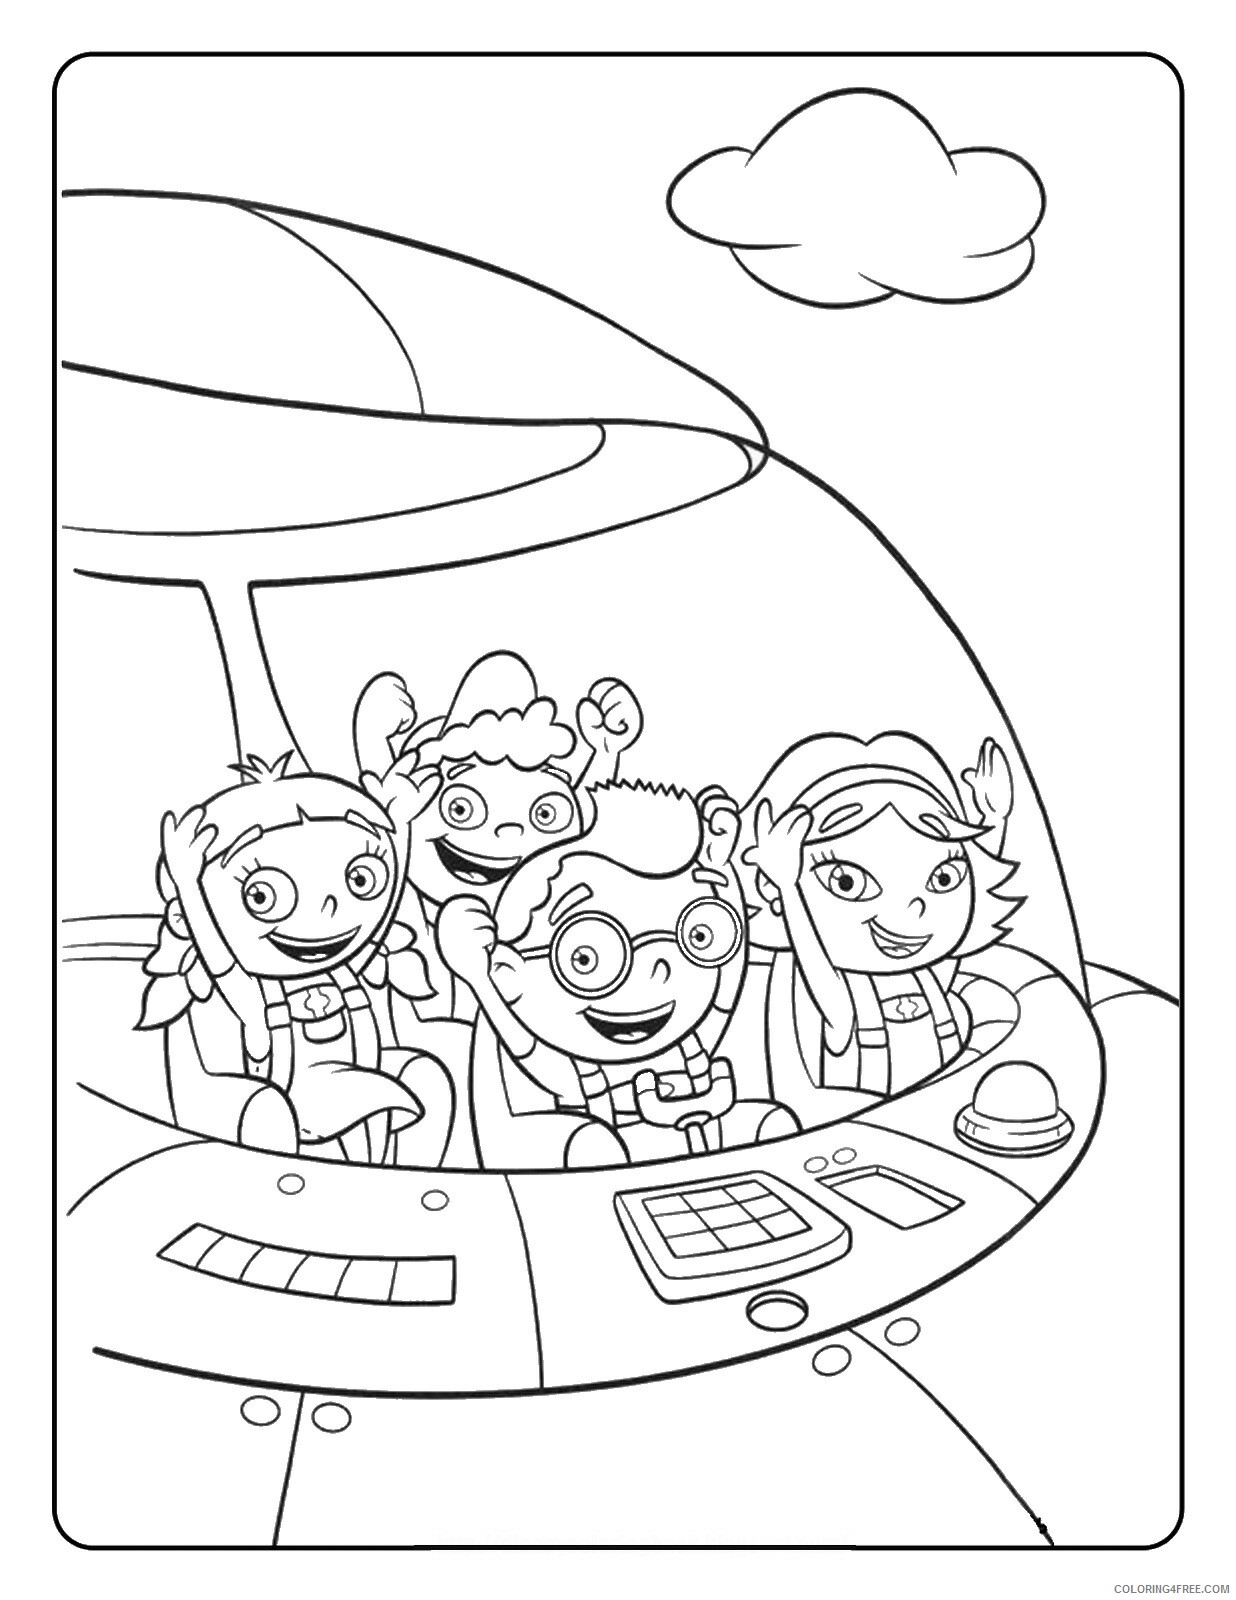 Little Einsteins Coloring Pages TV Film little_einsteins_10 Printable 2020 04474 Coloring4free